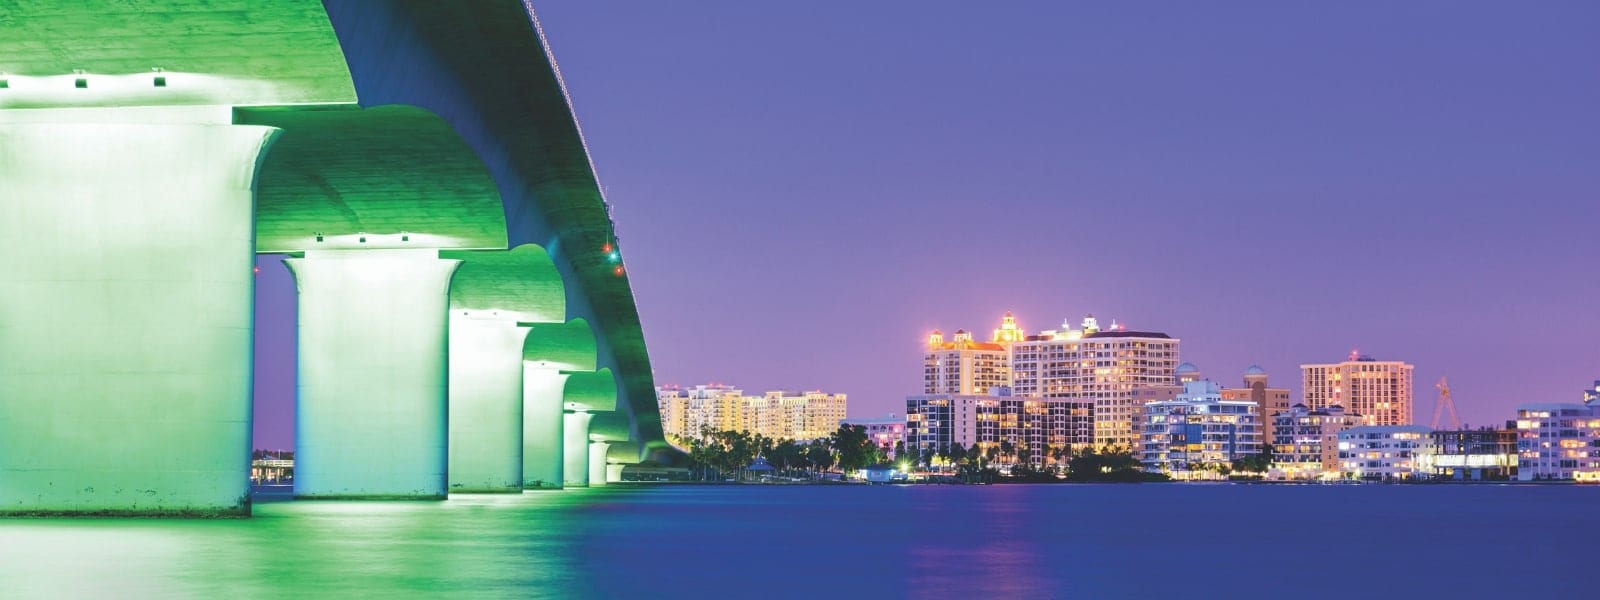 The Sarasota bay at sunset lit up with the bottom of the bridge on the left and the city lights straight ahead